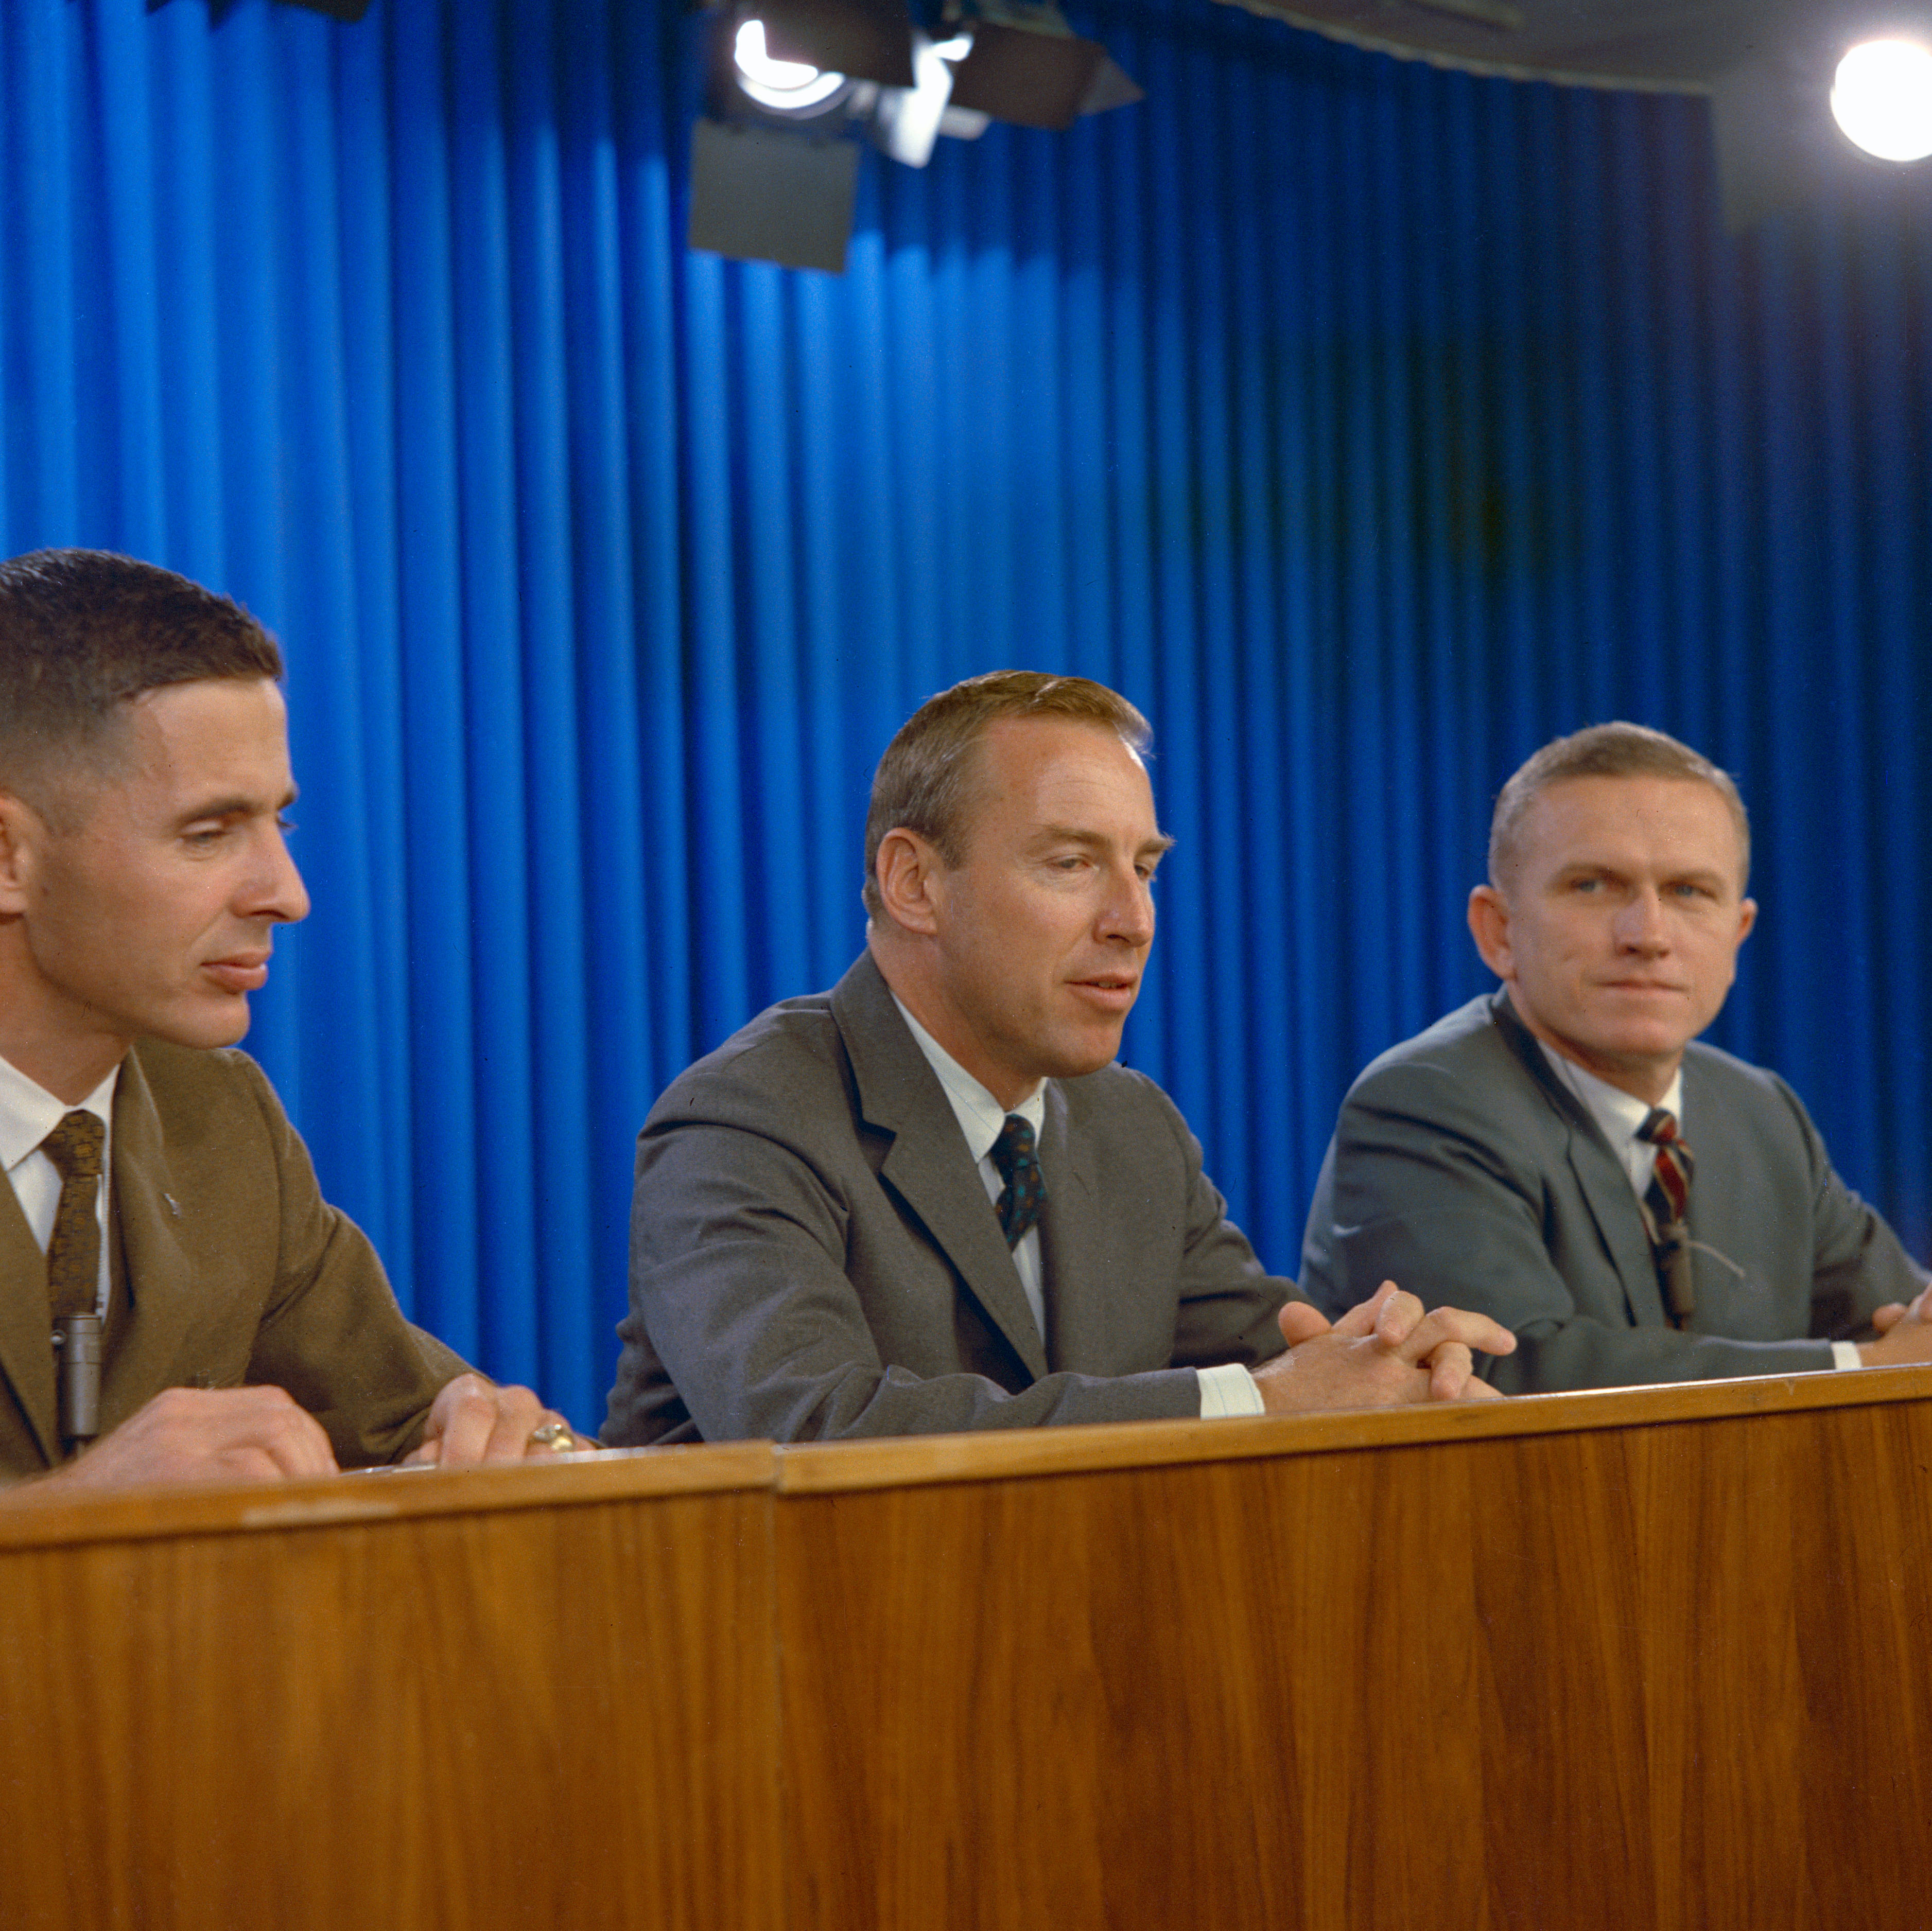 Apollo 8 astronauts William A. Anders, left, James A. Lovell, and Frank Borman during a press conference shortly after the announcement of their mission to orbit the Moon